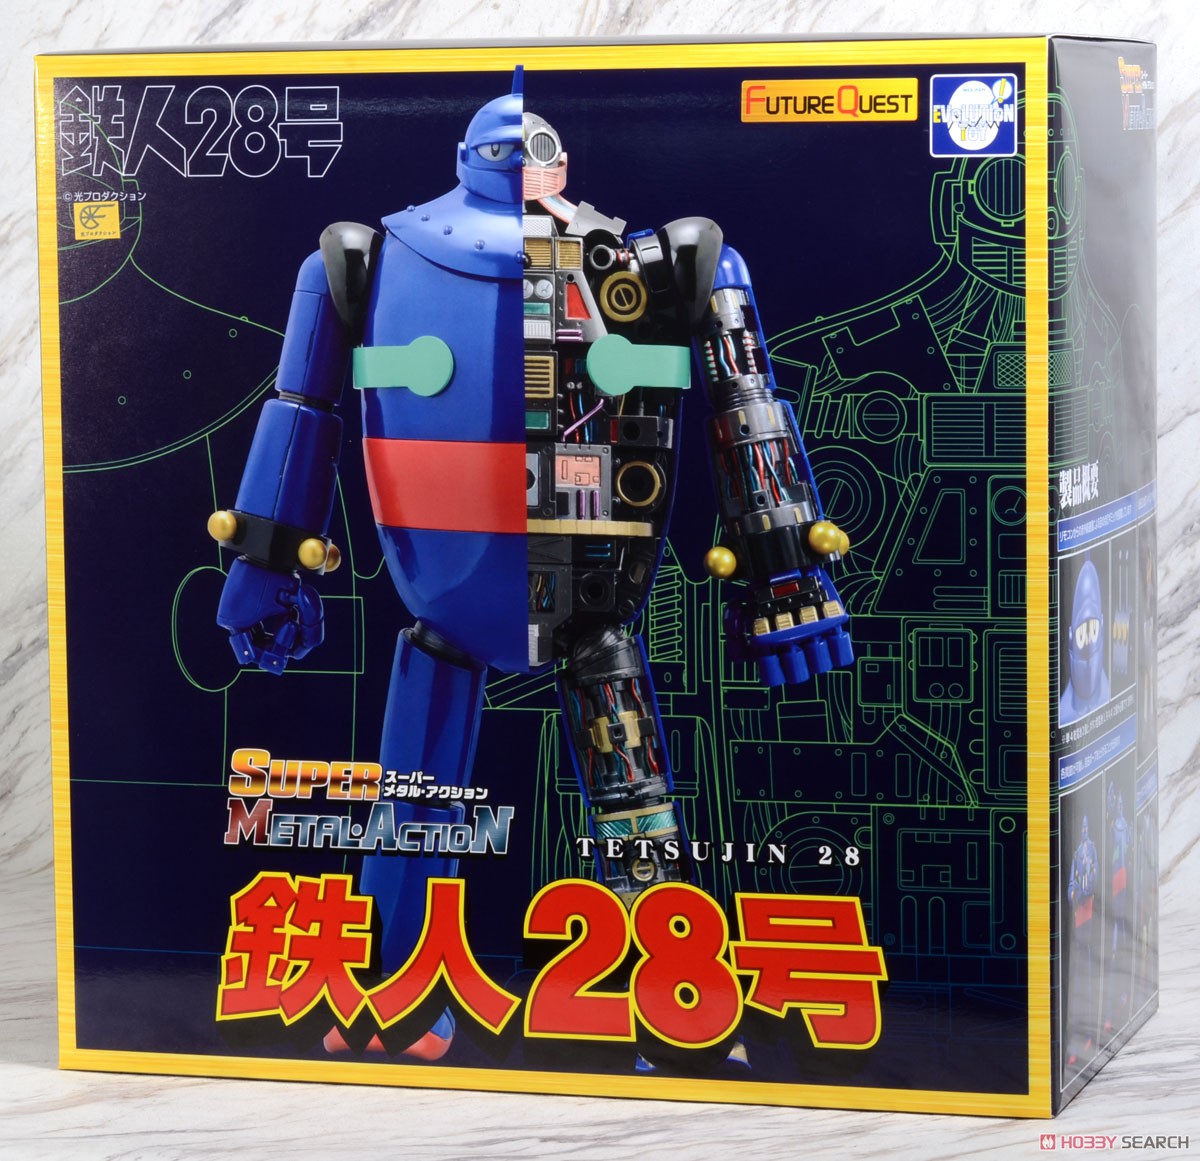 Super Metal Action Tetsujin 28-go (Completed) Package1